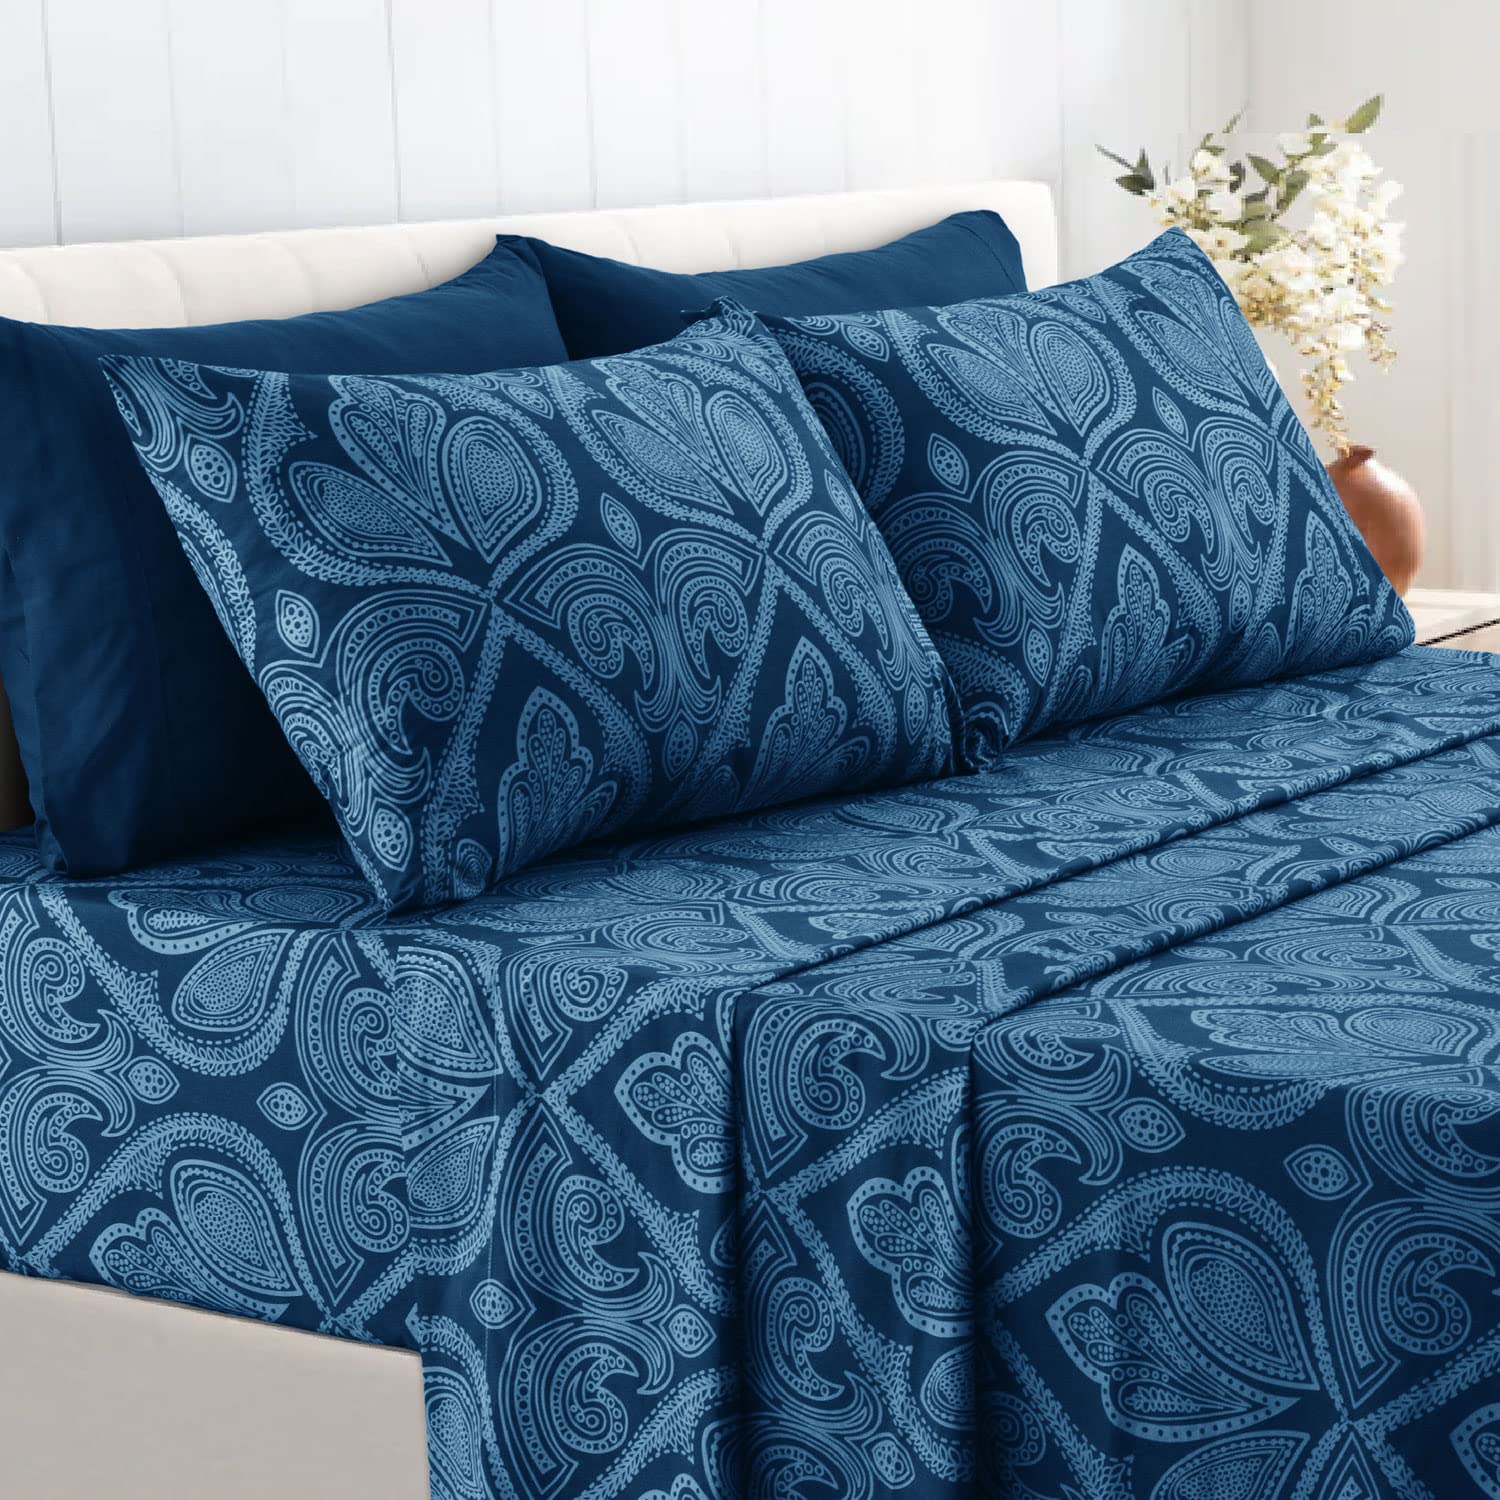 Book Cover LDC Queen Bed Sheets Set -Queen Sheets Brushed Microfiber 1800 Thread Count Bedding -Wrinkle, Stain, Fade Resistant-Deep Pocket Queen Size Sheets Set - 6 PC(Queen, Paisley Navy Blue)